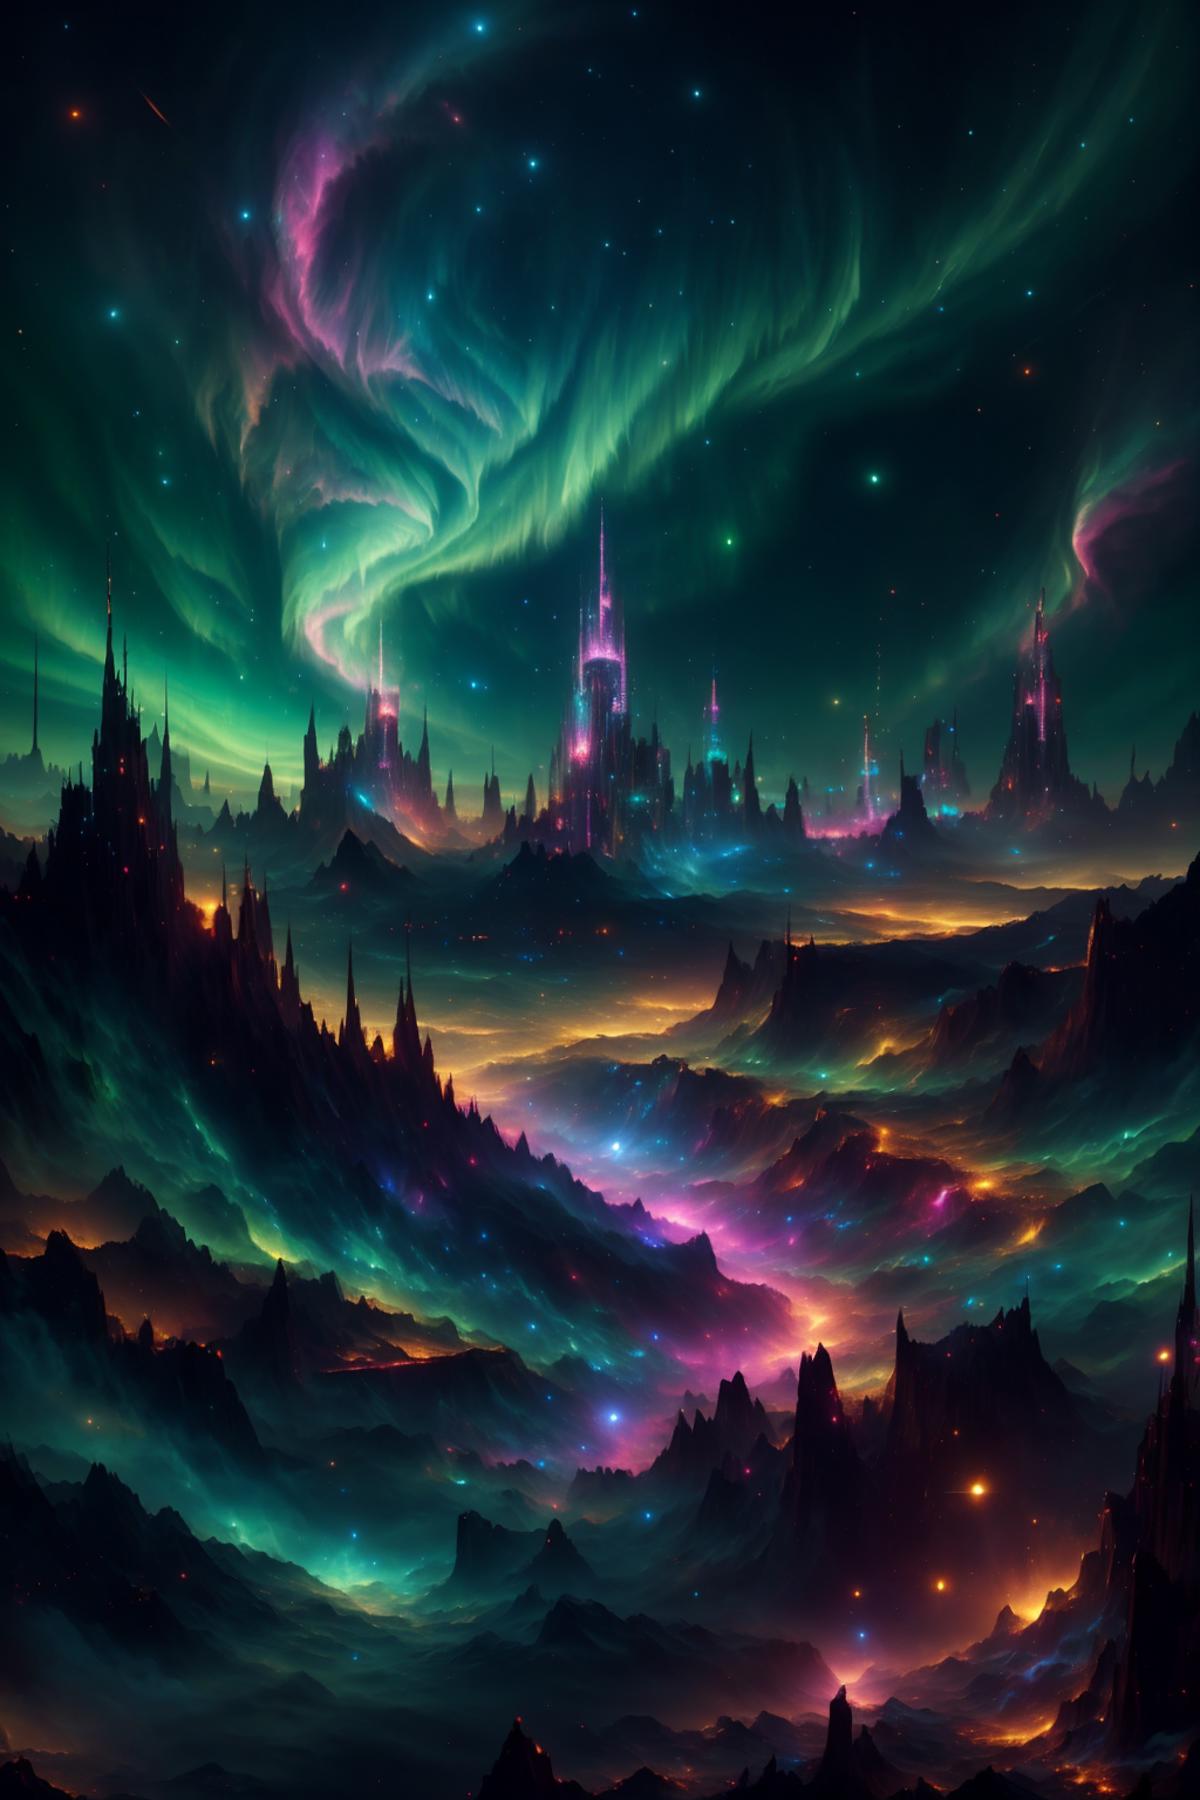 A vivid digital painting of a neon green and purple sky with a fantastical cityscape and mountains.